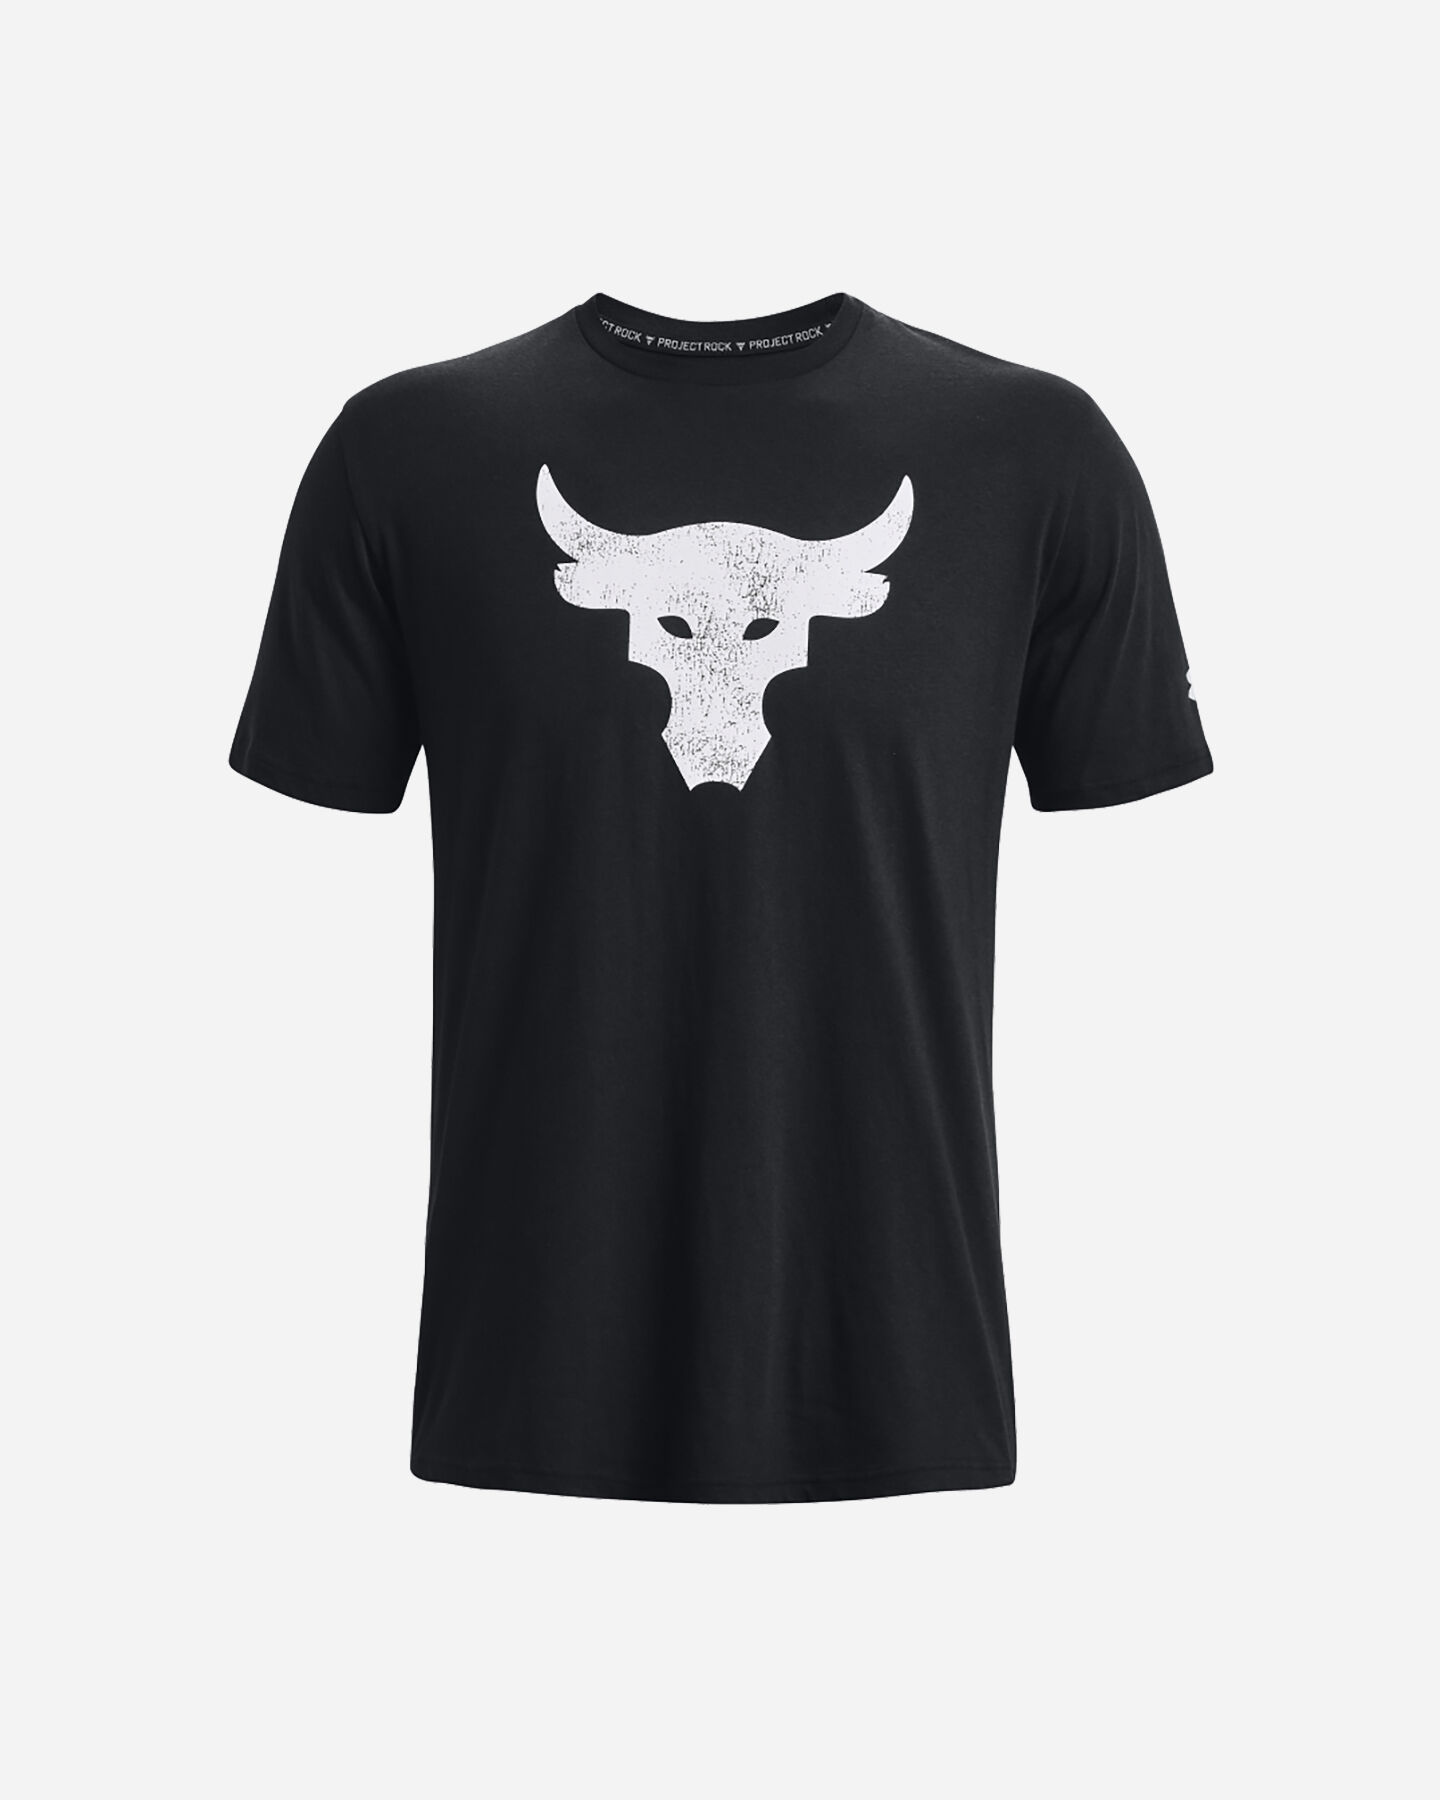  T-Shirt UNDER ARMOUR THE ROCK BRAHMA BULL M S5527821|0003|XS scatto 0